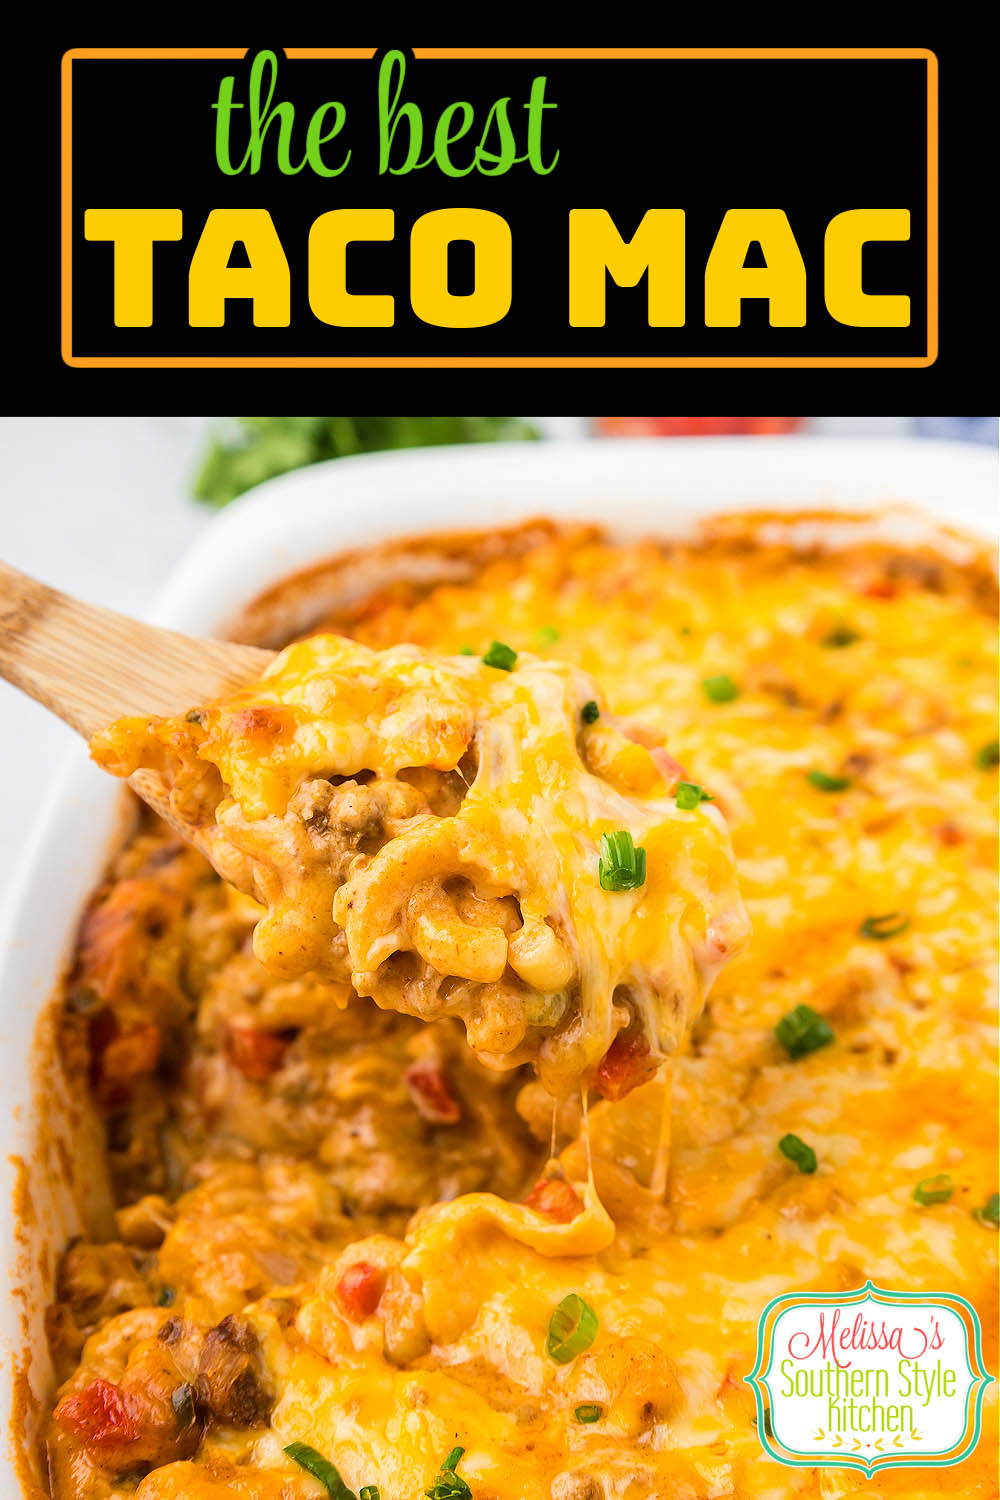 Treat the family to kicked up Taco Mac for supper #macaroni #macaroniandcheese #tacos #tacomac #tacorecipes #macandcheese #southernmacaroniandcheese #tacobeef #macaronicasserole